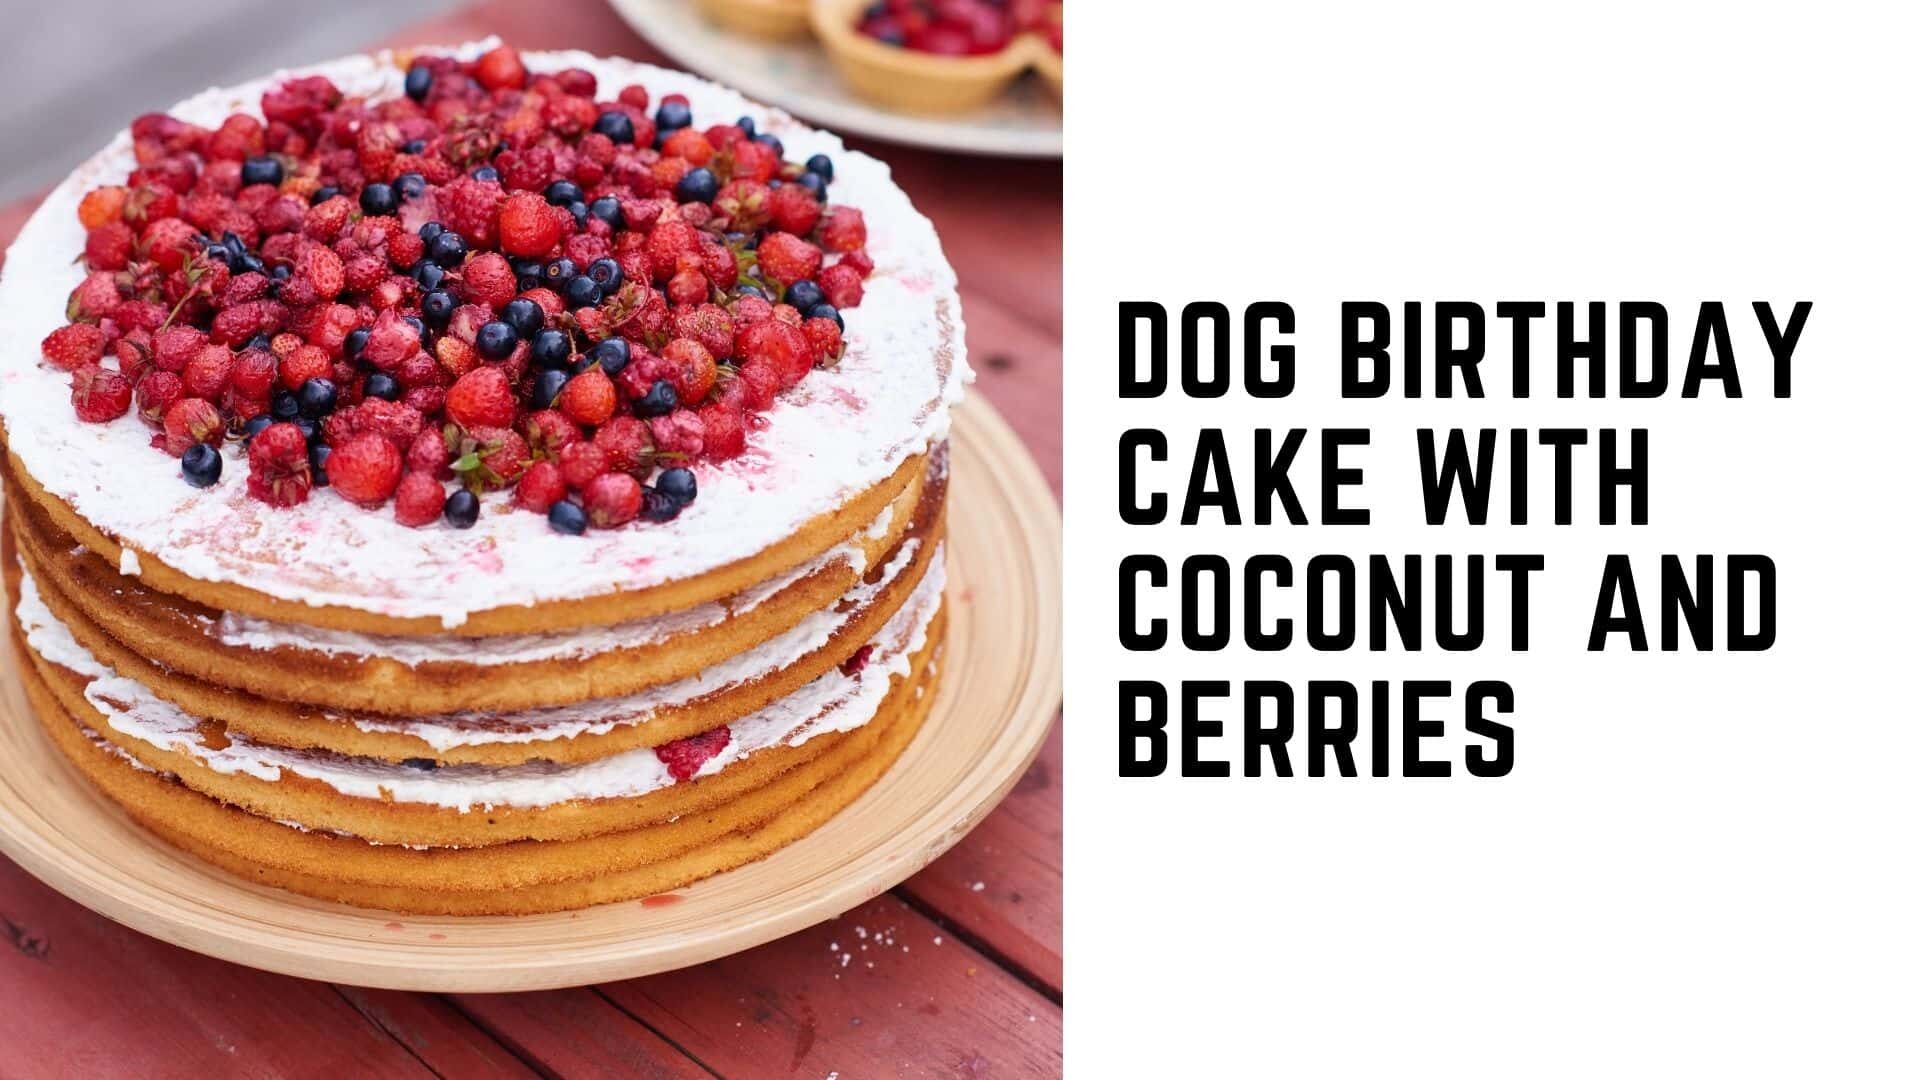 Dog birthday cake with coconut and berries